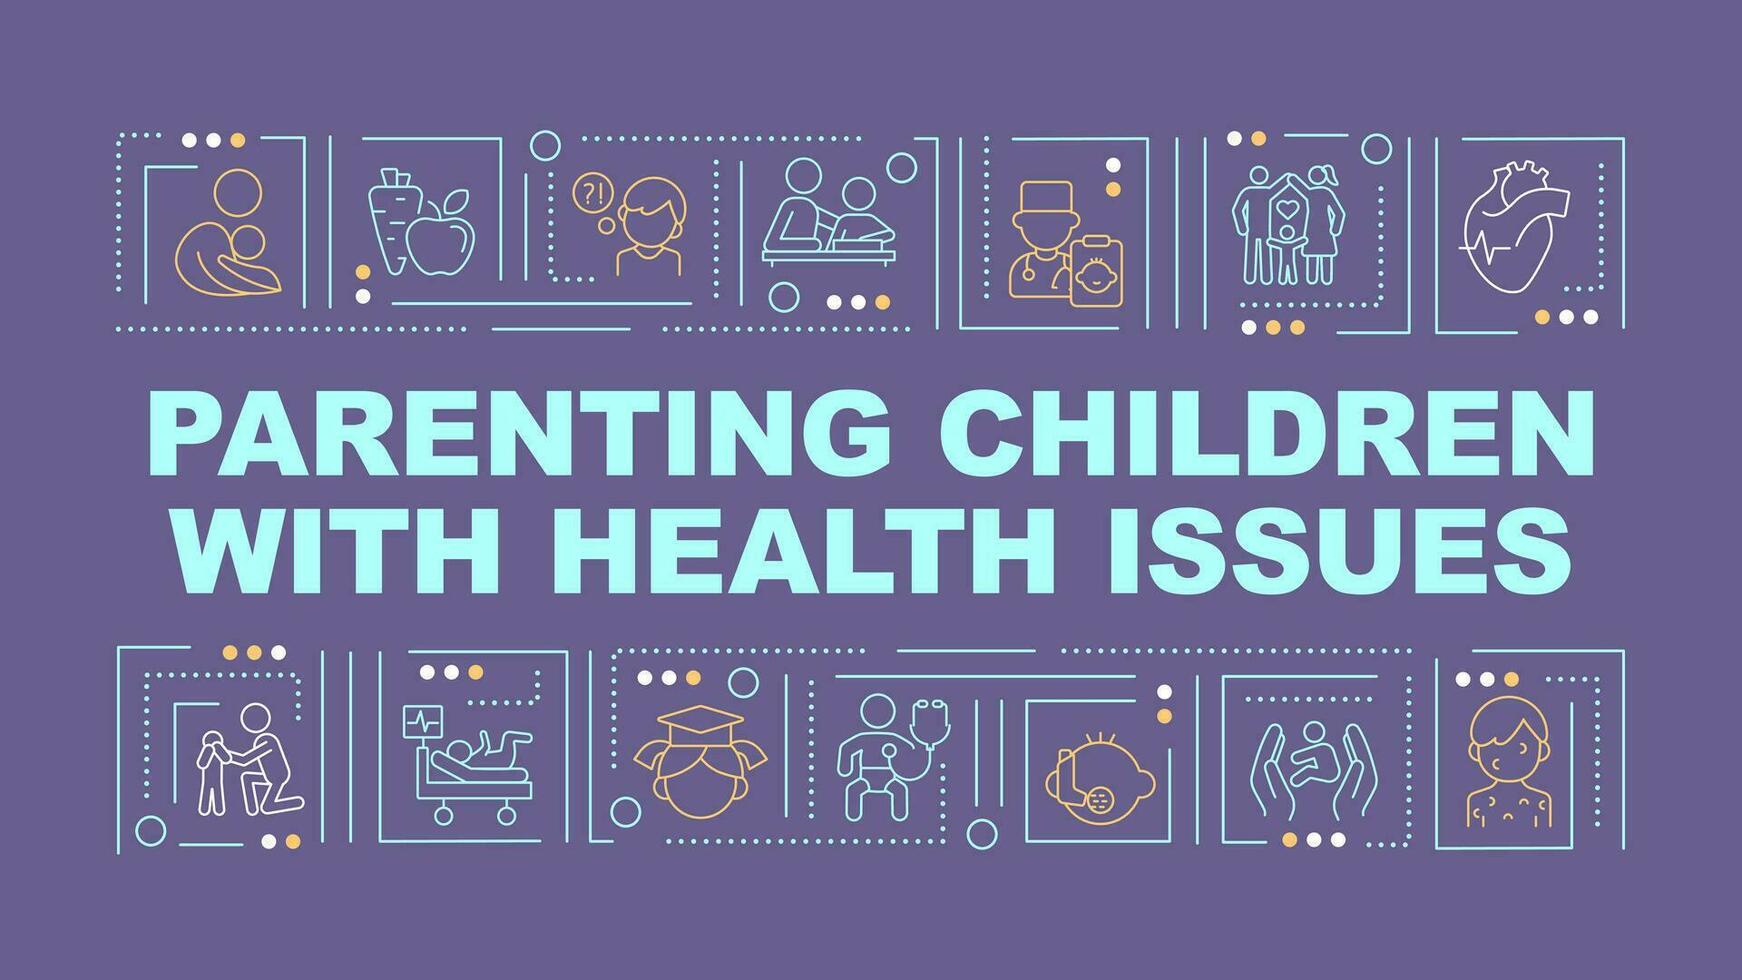 2D parenting children with health issues text various thin line icons concept on dark purple monochromatic background, editable 2D vector illustration.